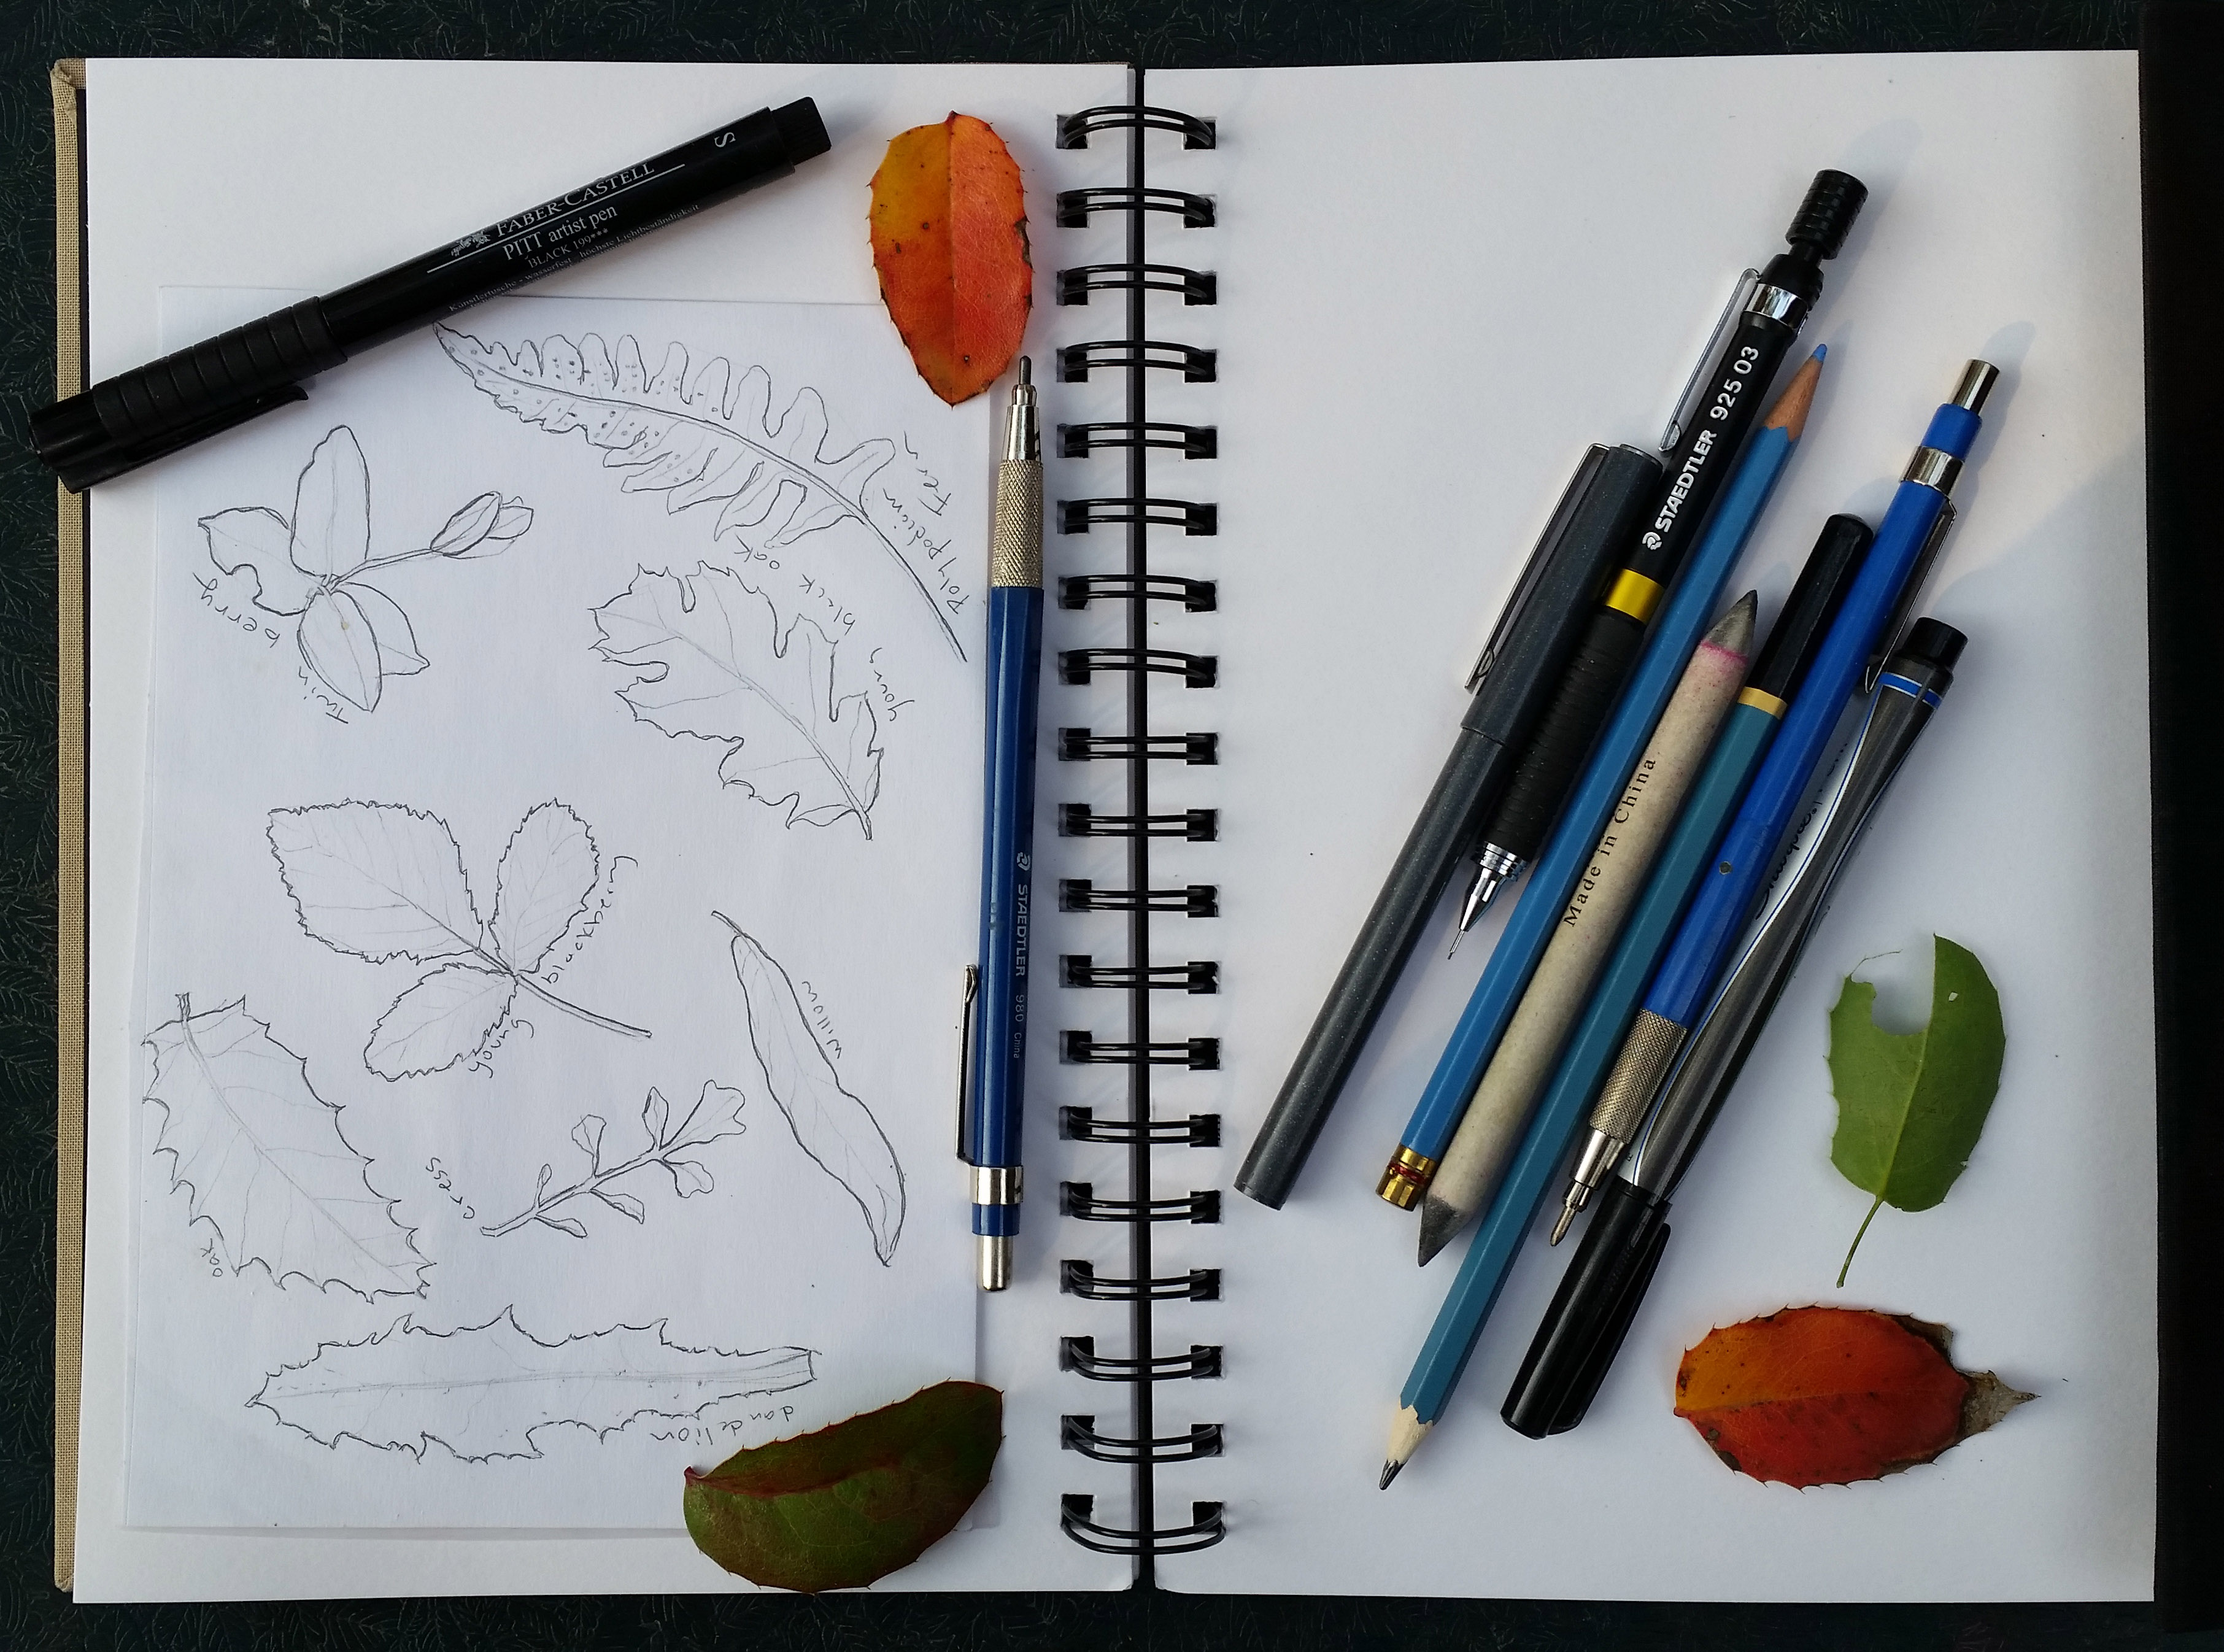 Hints for accurate nature sketching